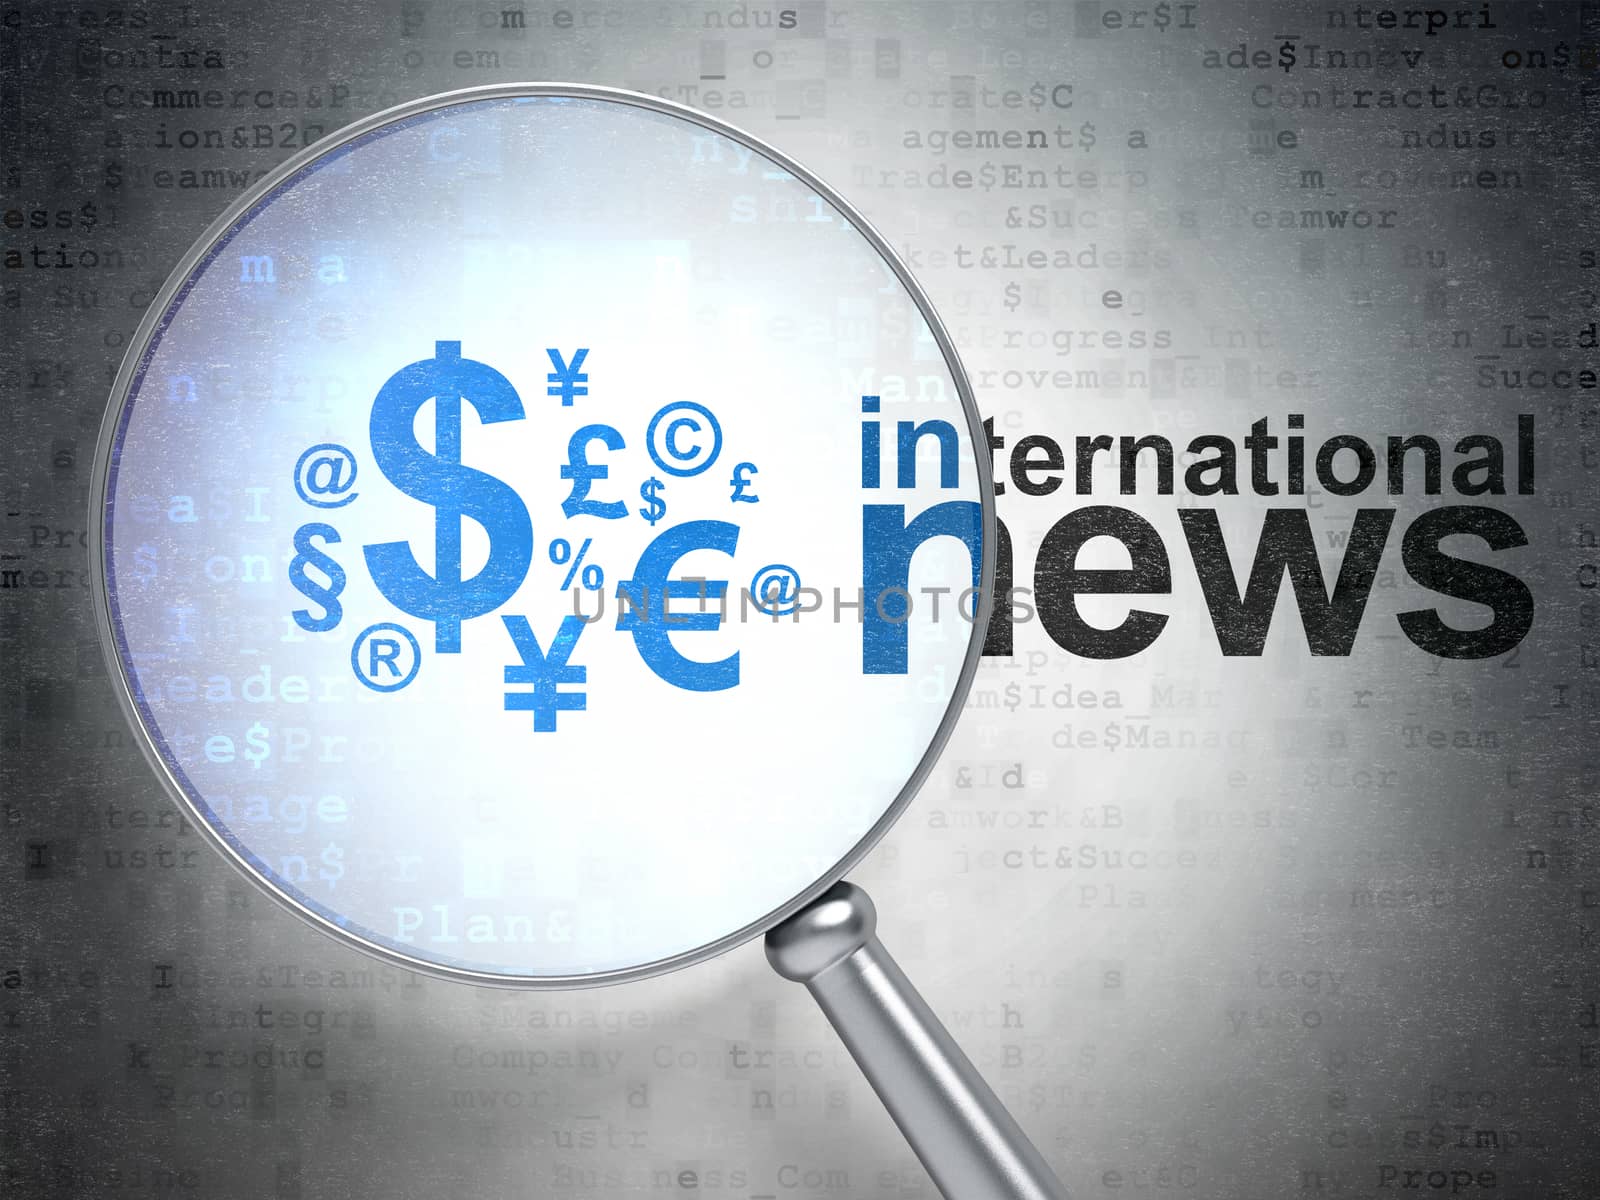 News concept: magnifying optical glass with Finance Symbol icon and International News word on digital background, 3D rendering